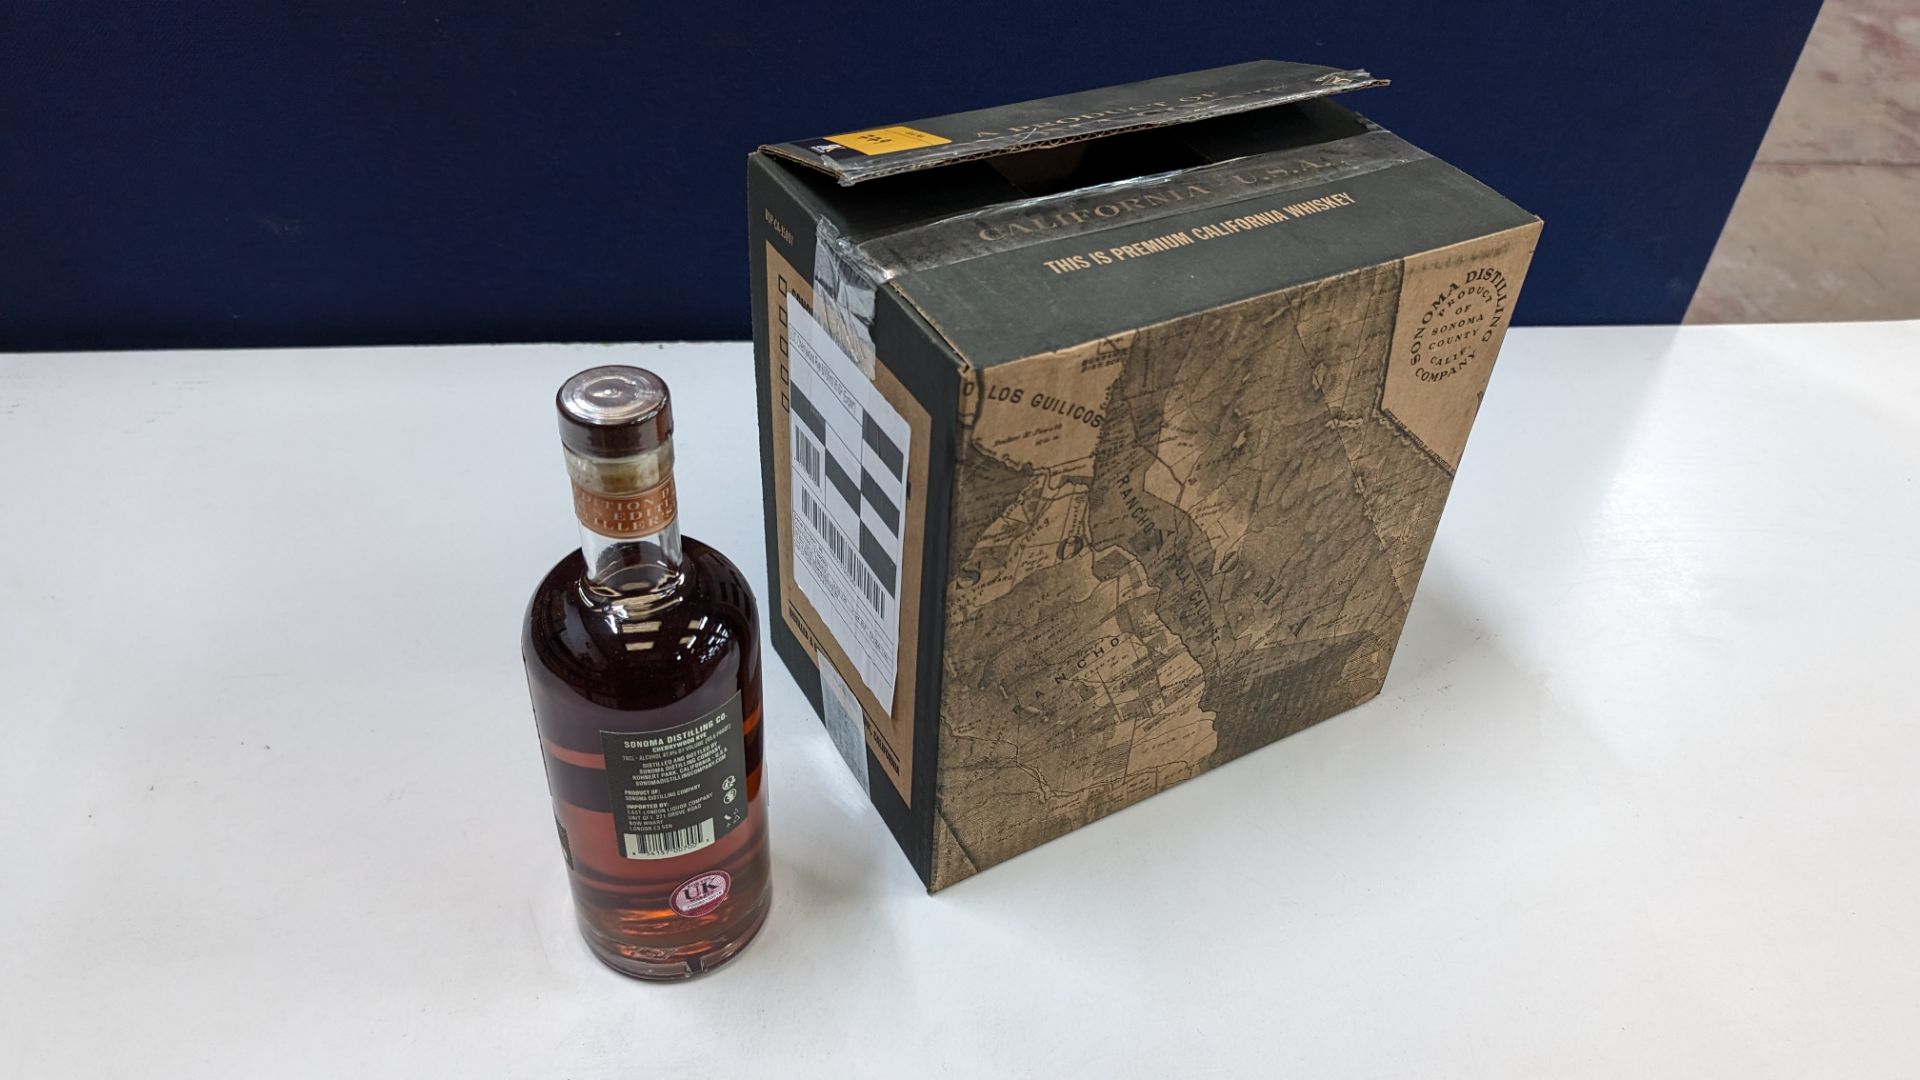 6 off 700ml bottles of Sonoma Cherrywood Rye Whiskey. In Sonoma branded box which includes bottling - Image 9 of 9